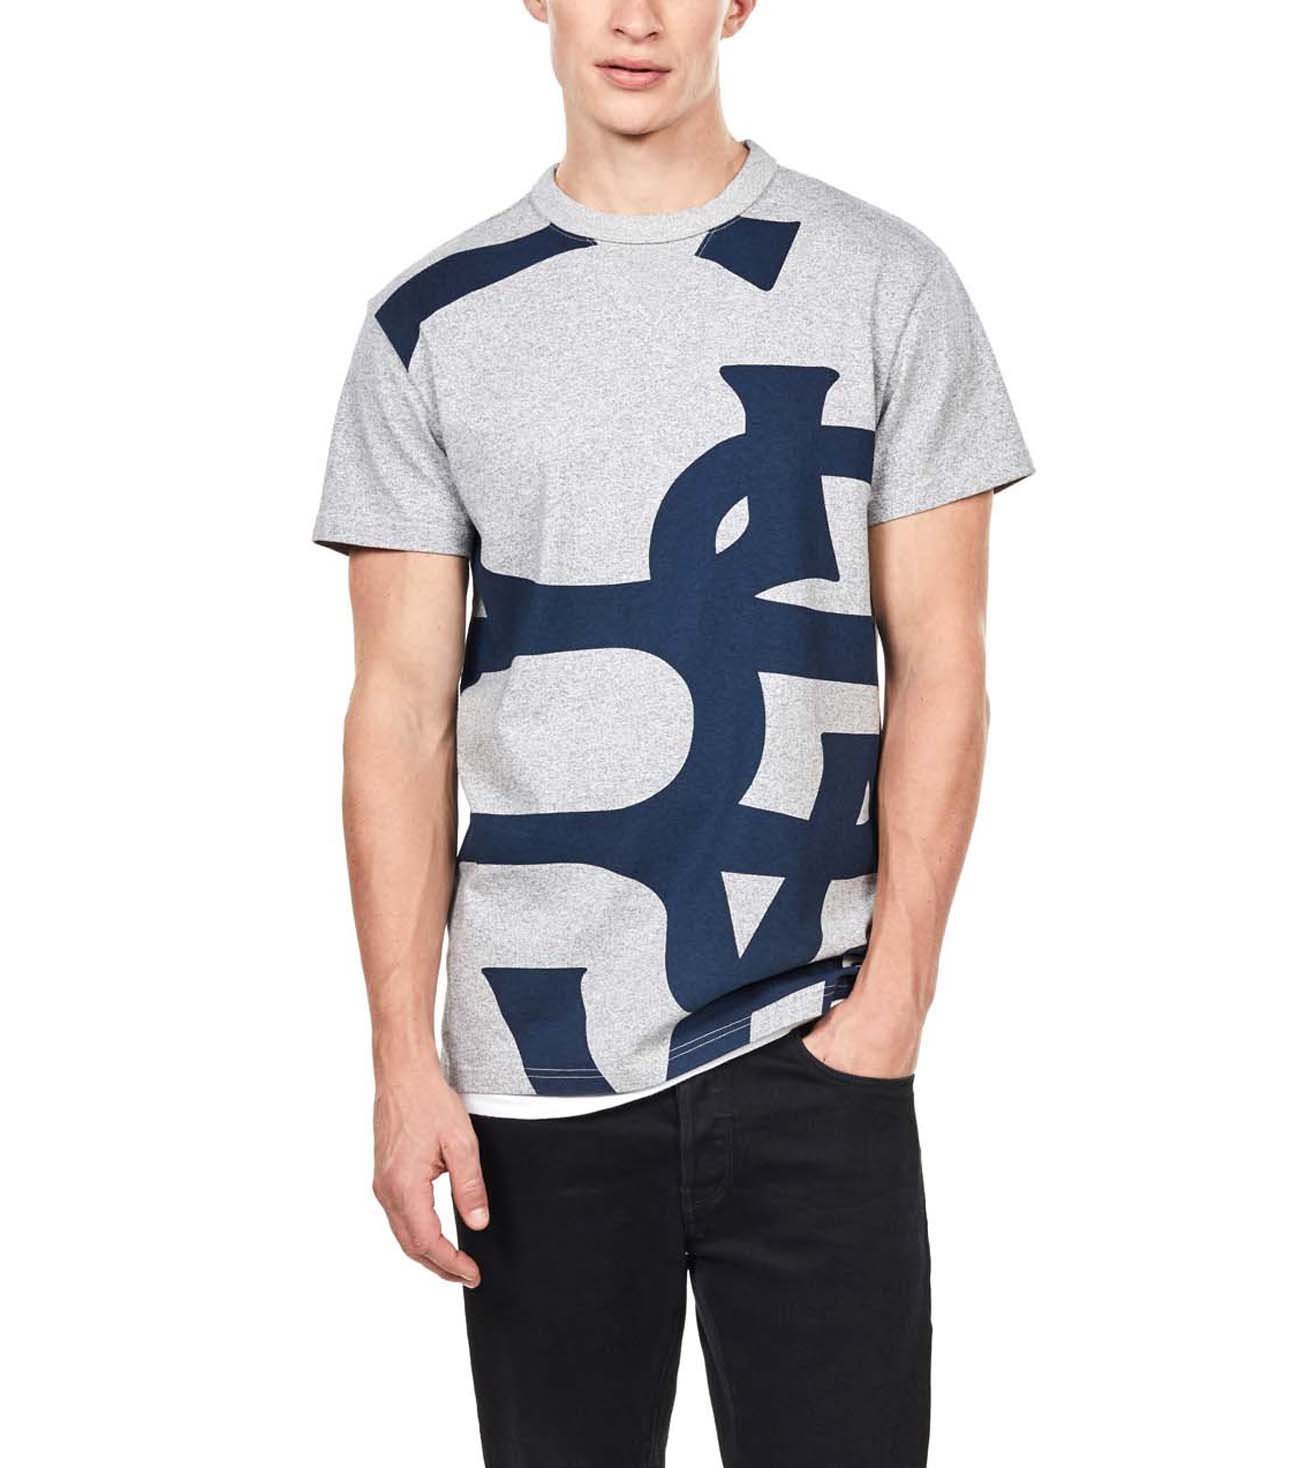 Download Get Mens Loose Fit Graphic T-Shirt Front View Pics ...